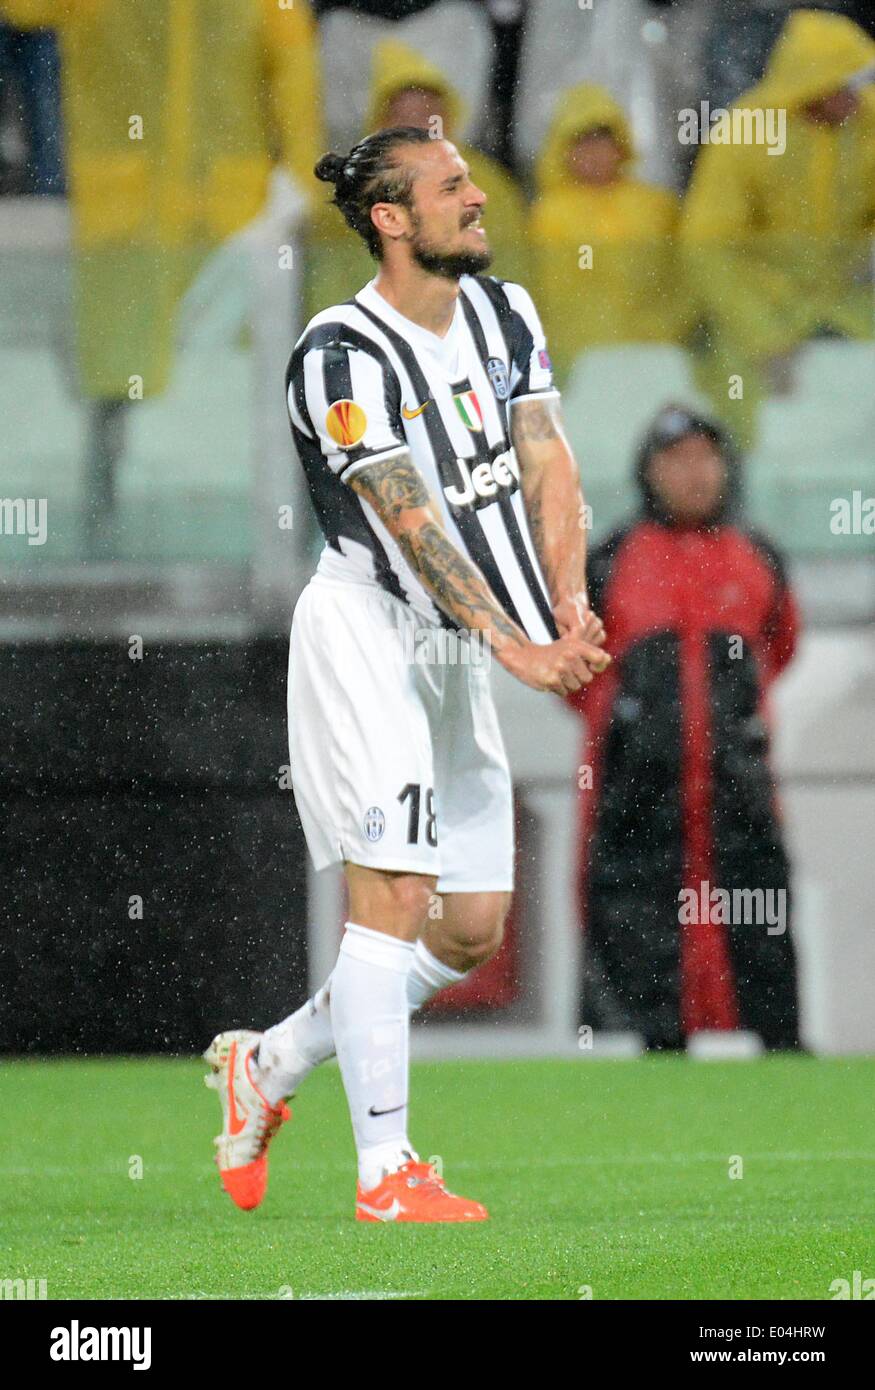 Turin, Italy. 1st May, 2014. Pablo Osvaldo of Juventus during the UEFA Europa League semifinal football match Juventus vs Benfica on May 1st, 2014 at the Juventus Stadium in Turin, Italy. Credit:  Federica Roselli/NurPhoto/ZUMAPRESS.com/Alamy Live News Stock Photo